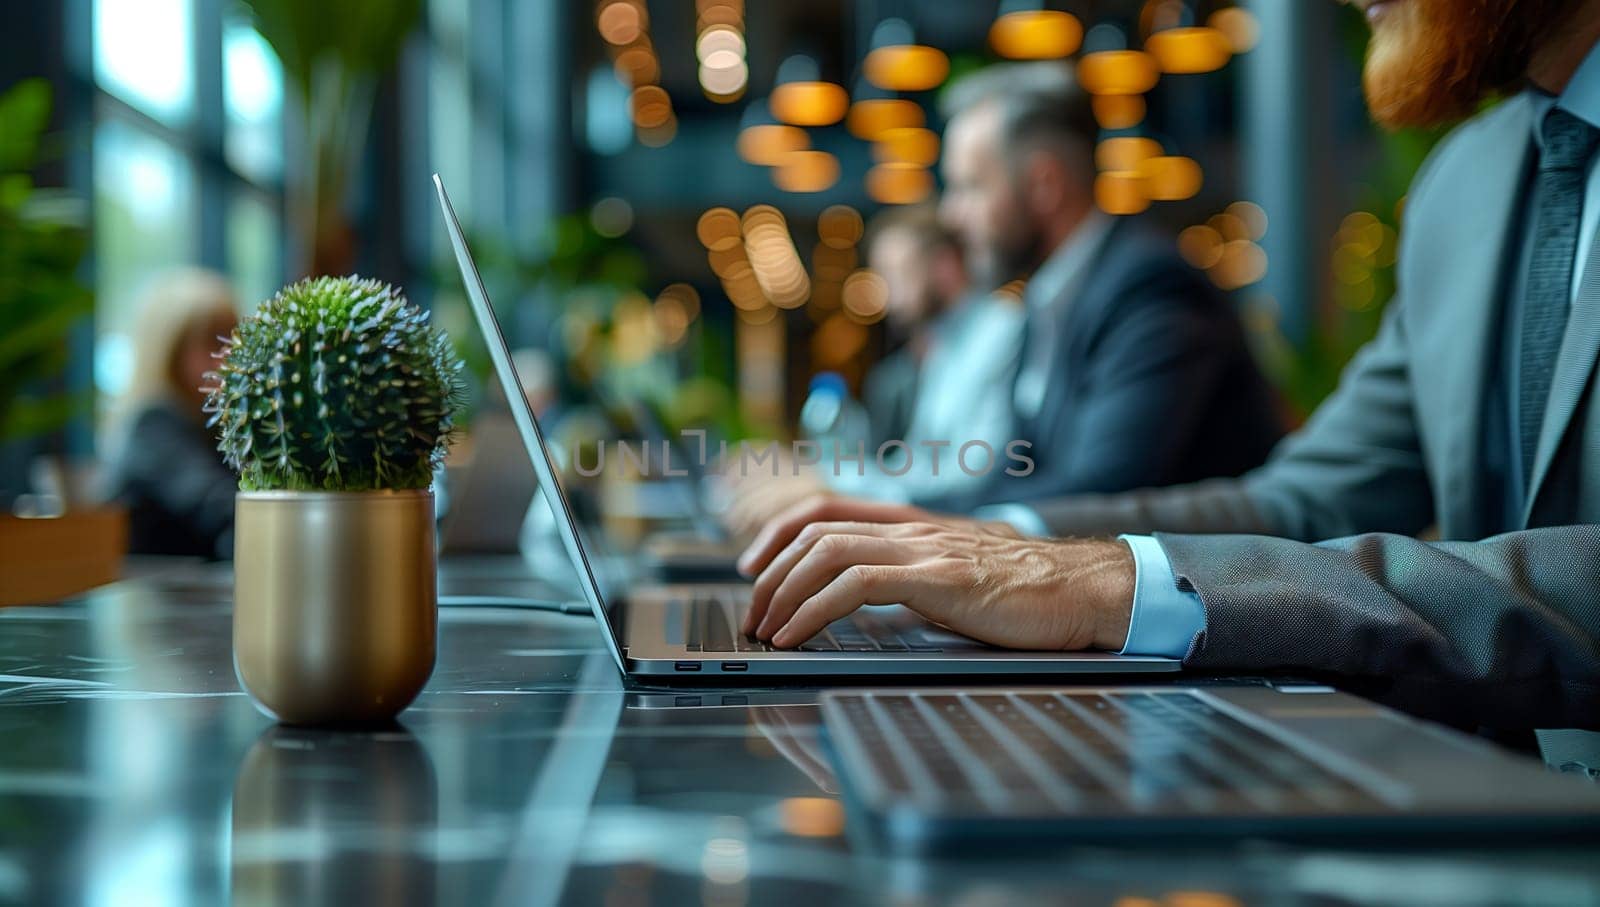 A man in a suit typing on a laptop at a table with a houseplant by richwolf